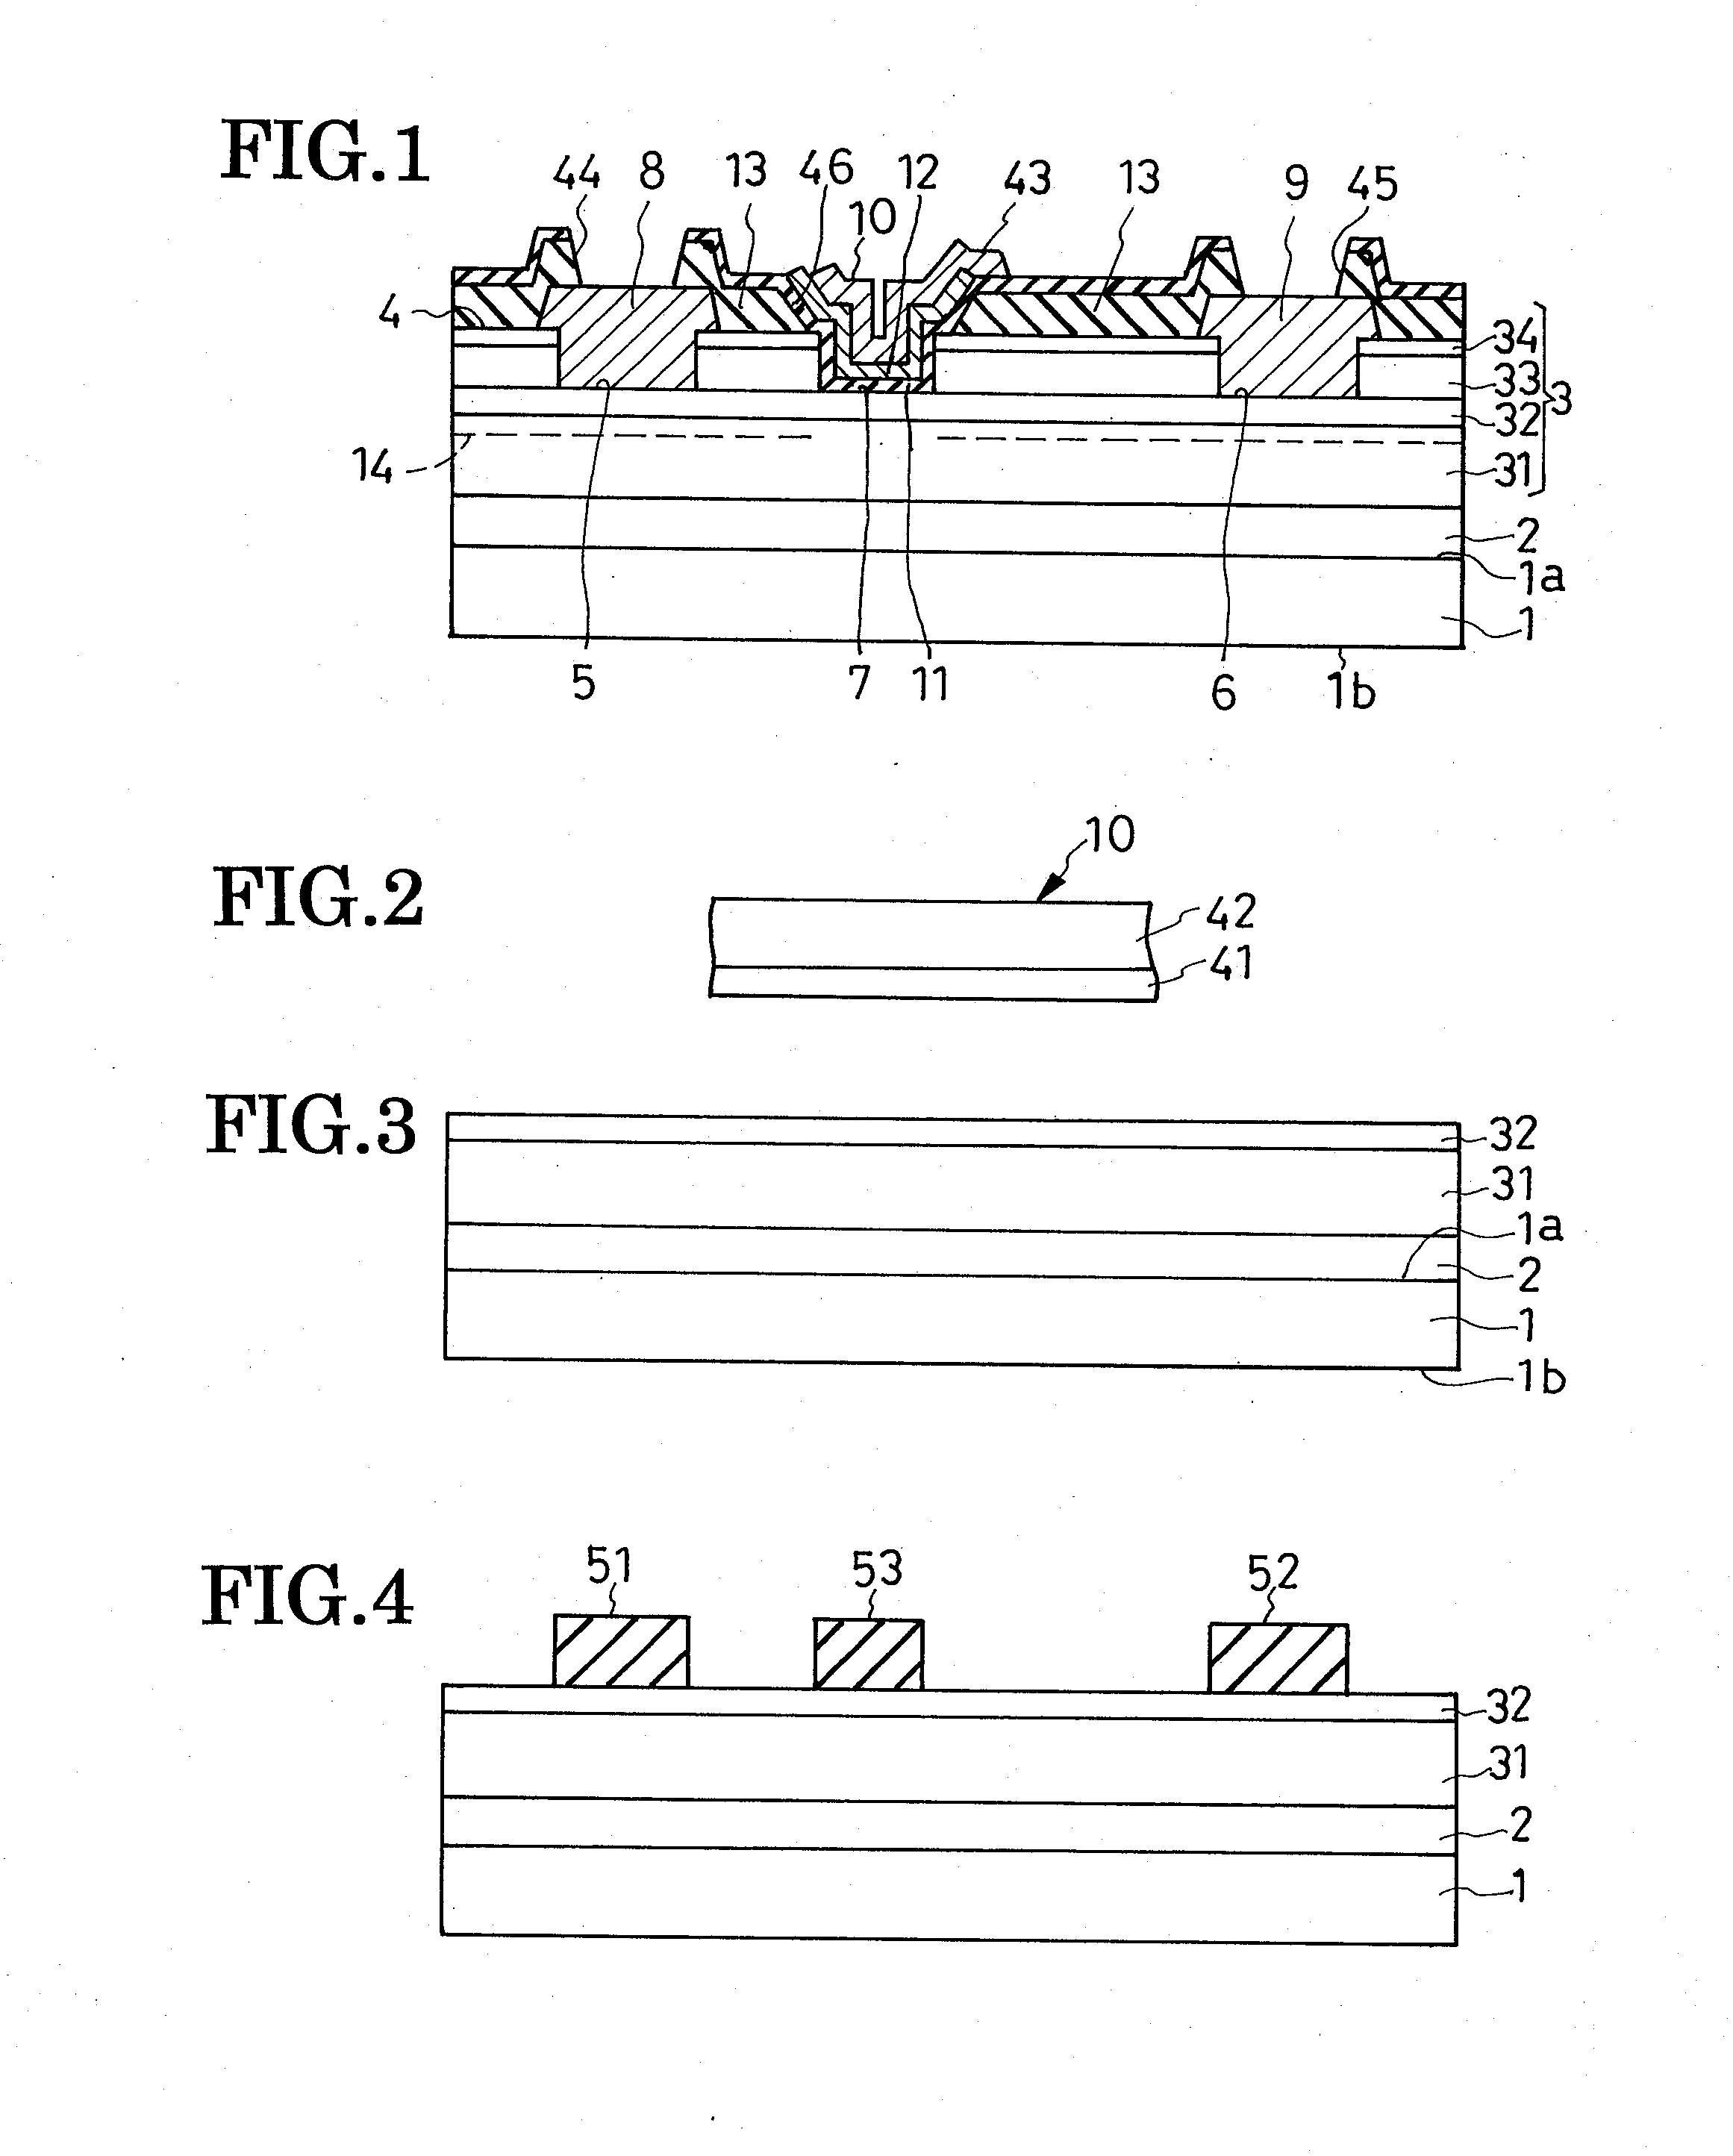 Field-effect semiconductor device, and method of fabrication